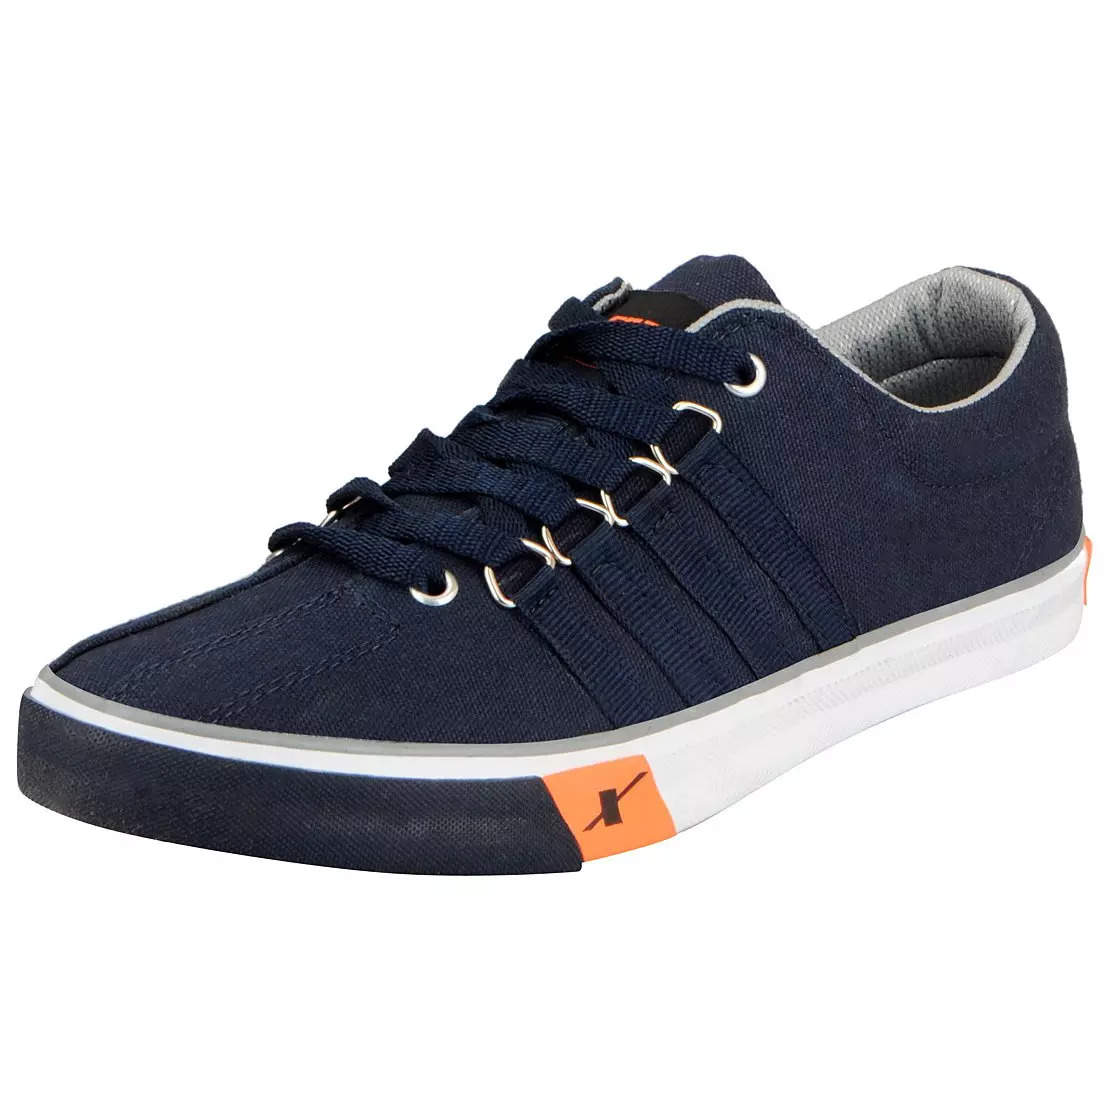 Buy Sparx Men's Navy Sky Blue Canvas Shoes -8 at Amazon.in